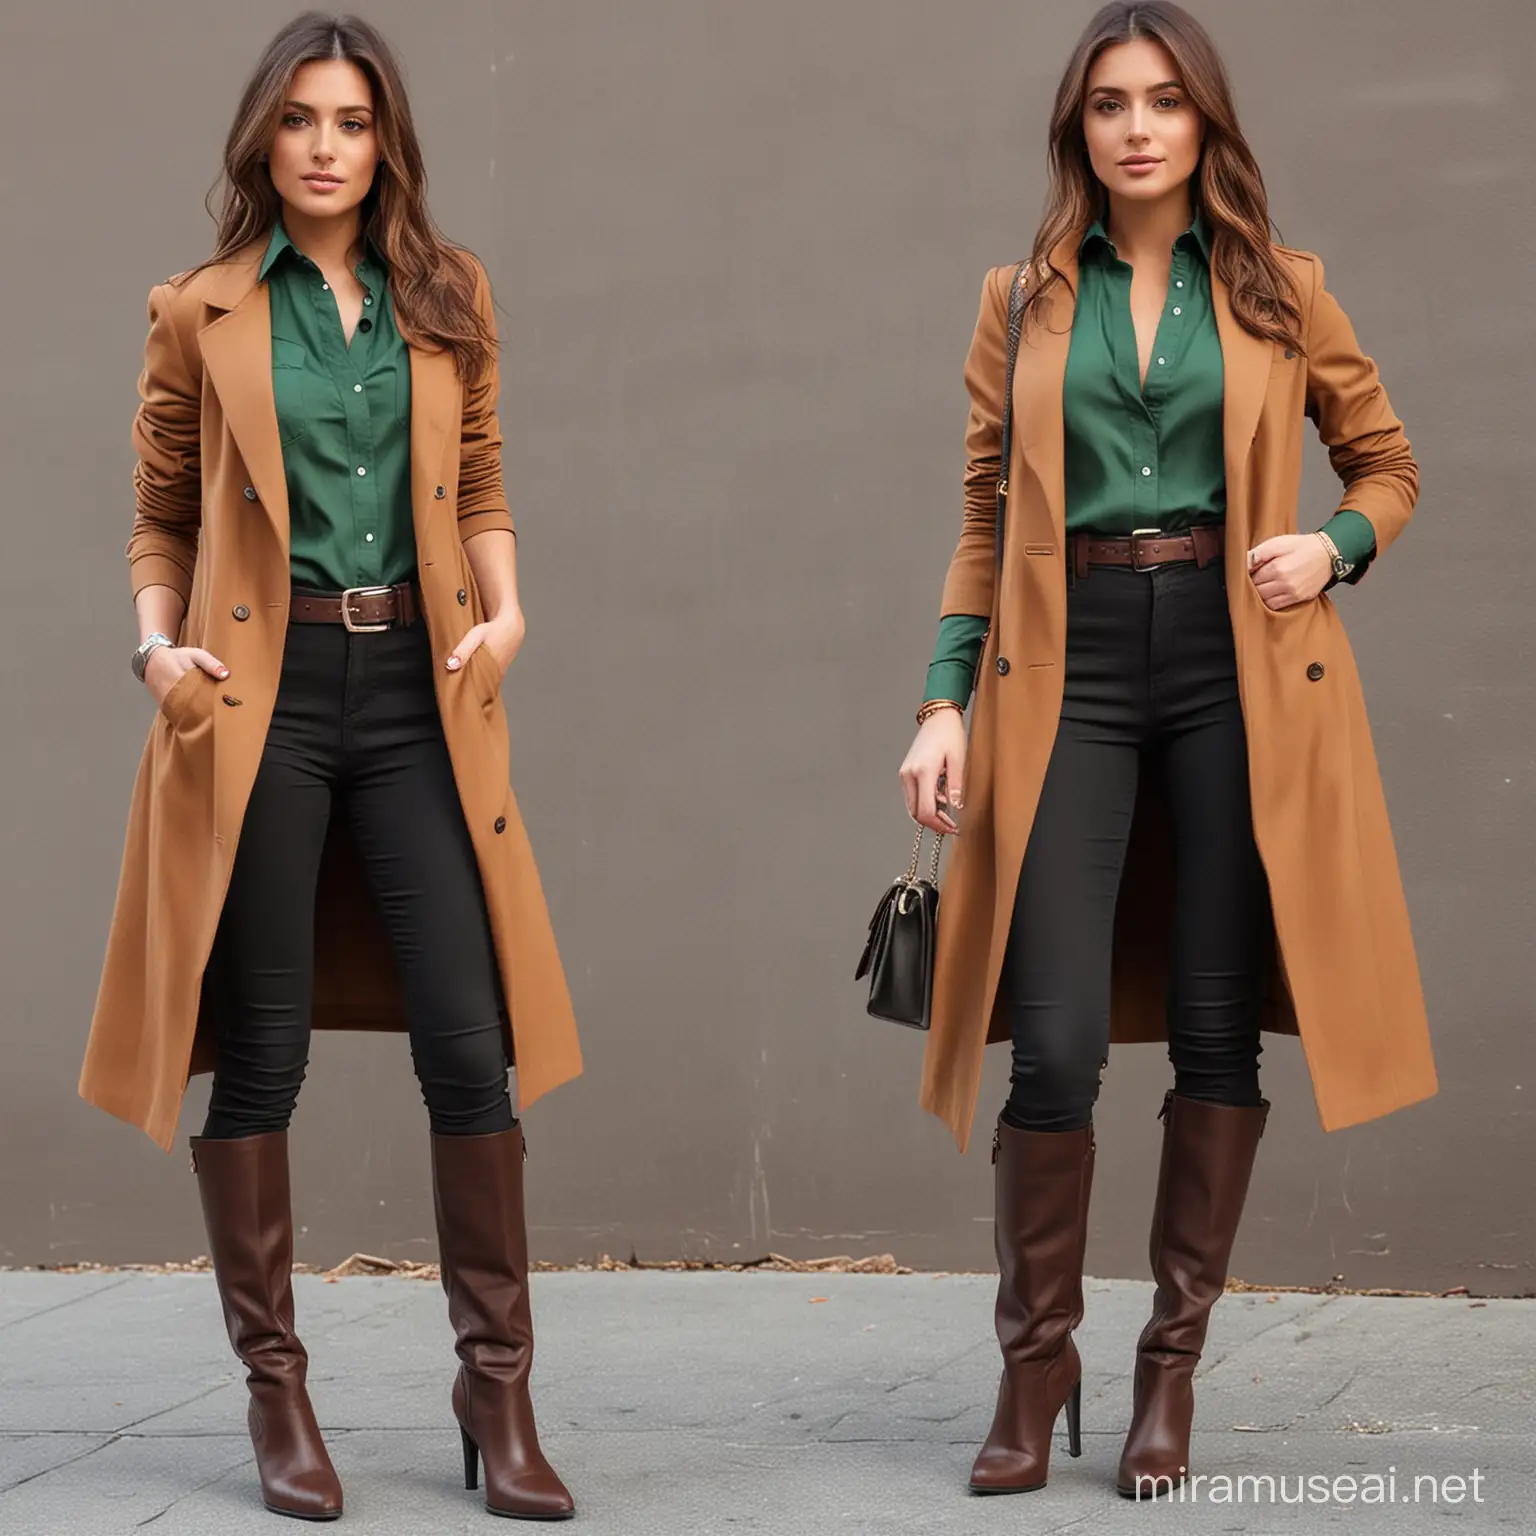 Modern Tomboy Woman in Stylish Business Casual Attire with Brown Coat and Green Shirt